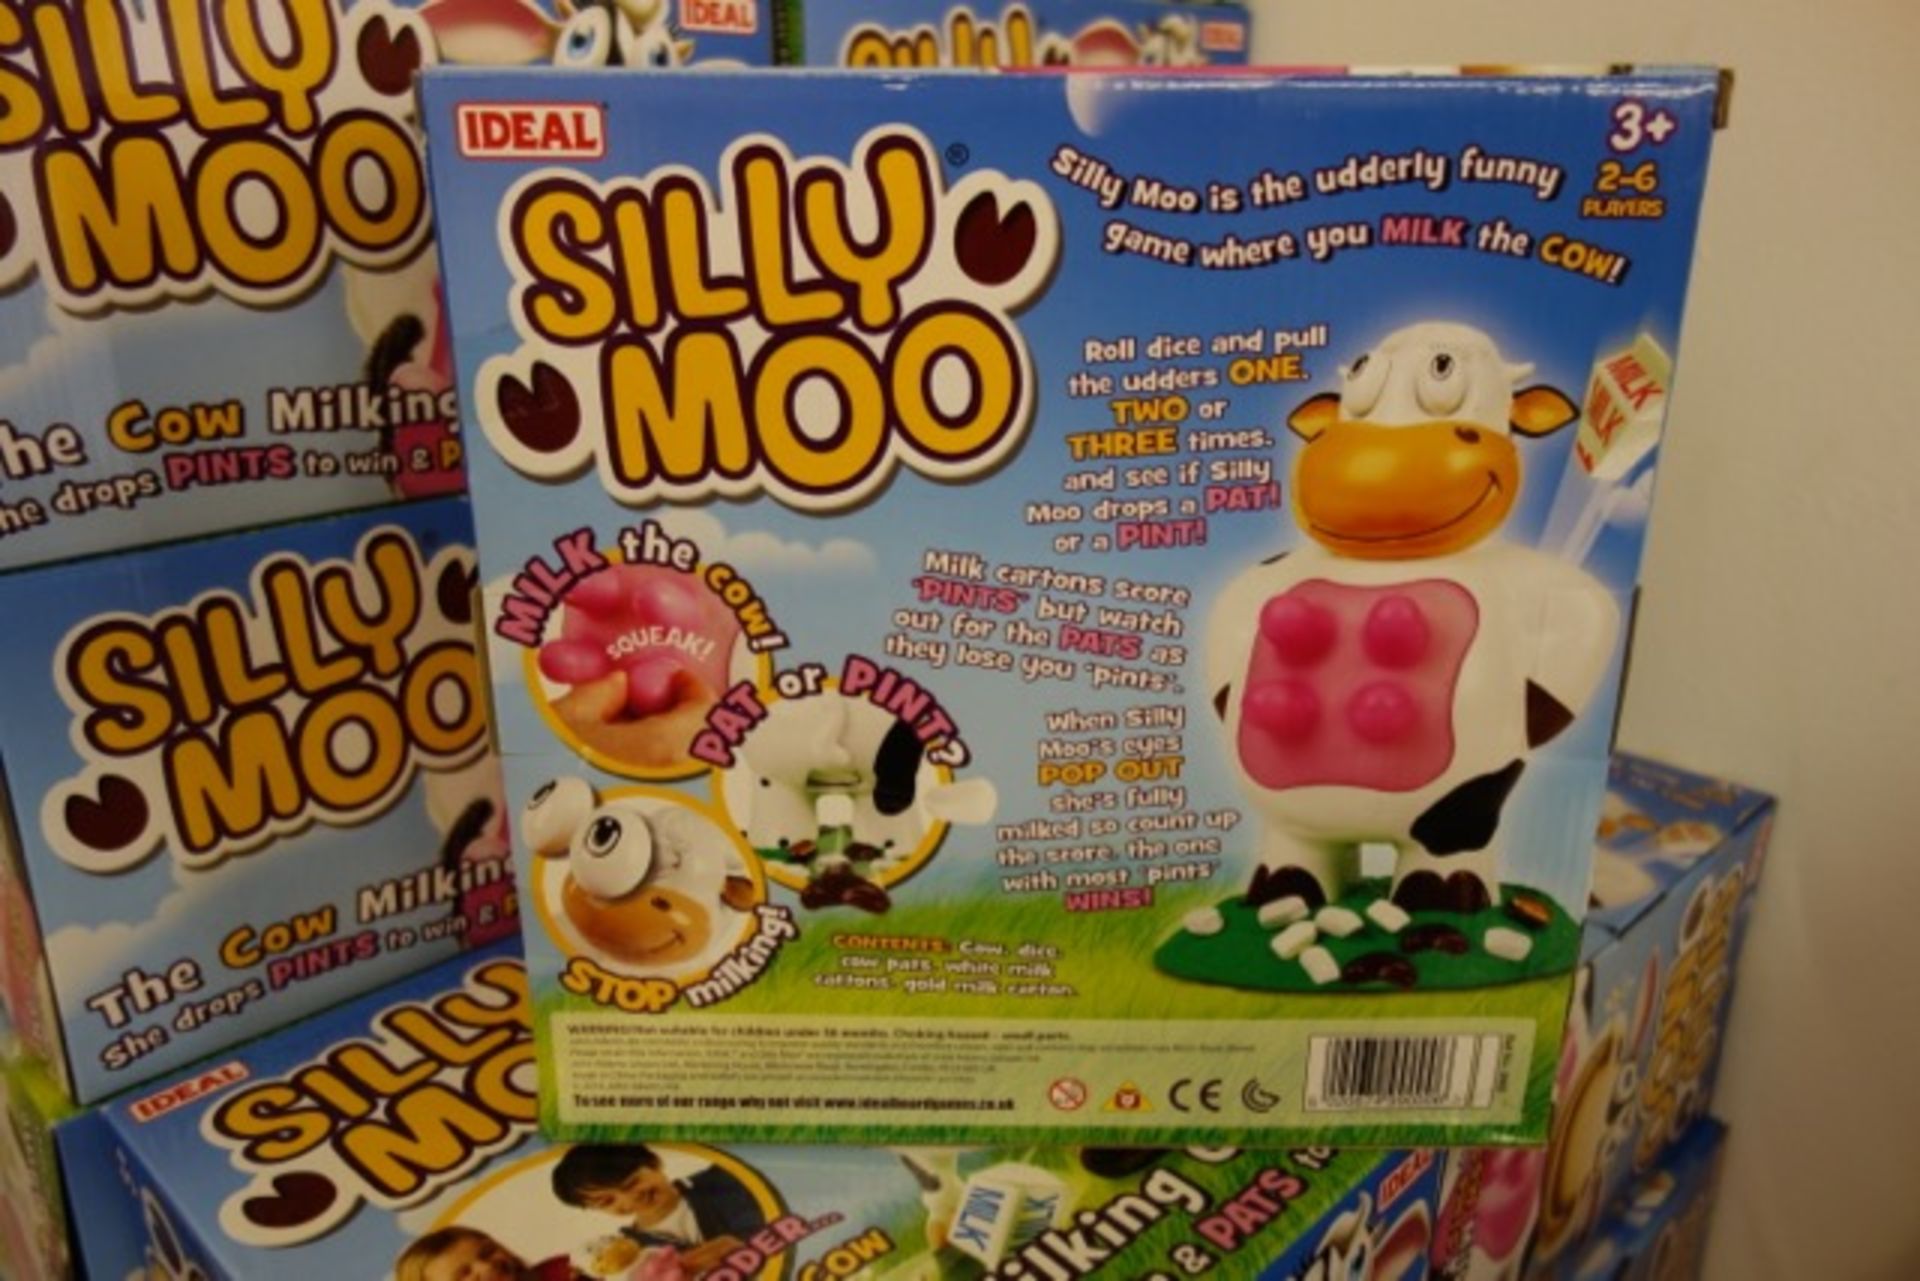 8 x Brand New - Silly Moo - The Cow Milking Game Playset - Image 2 of 2